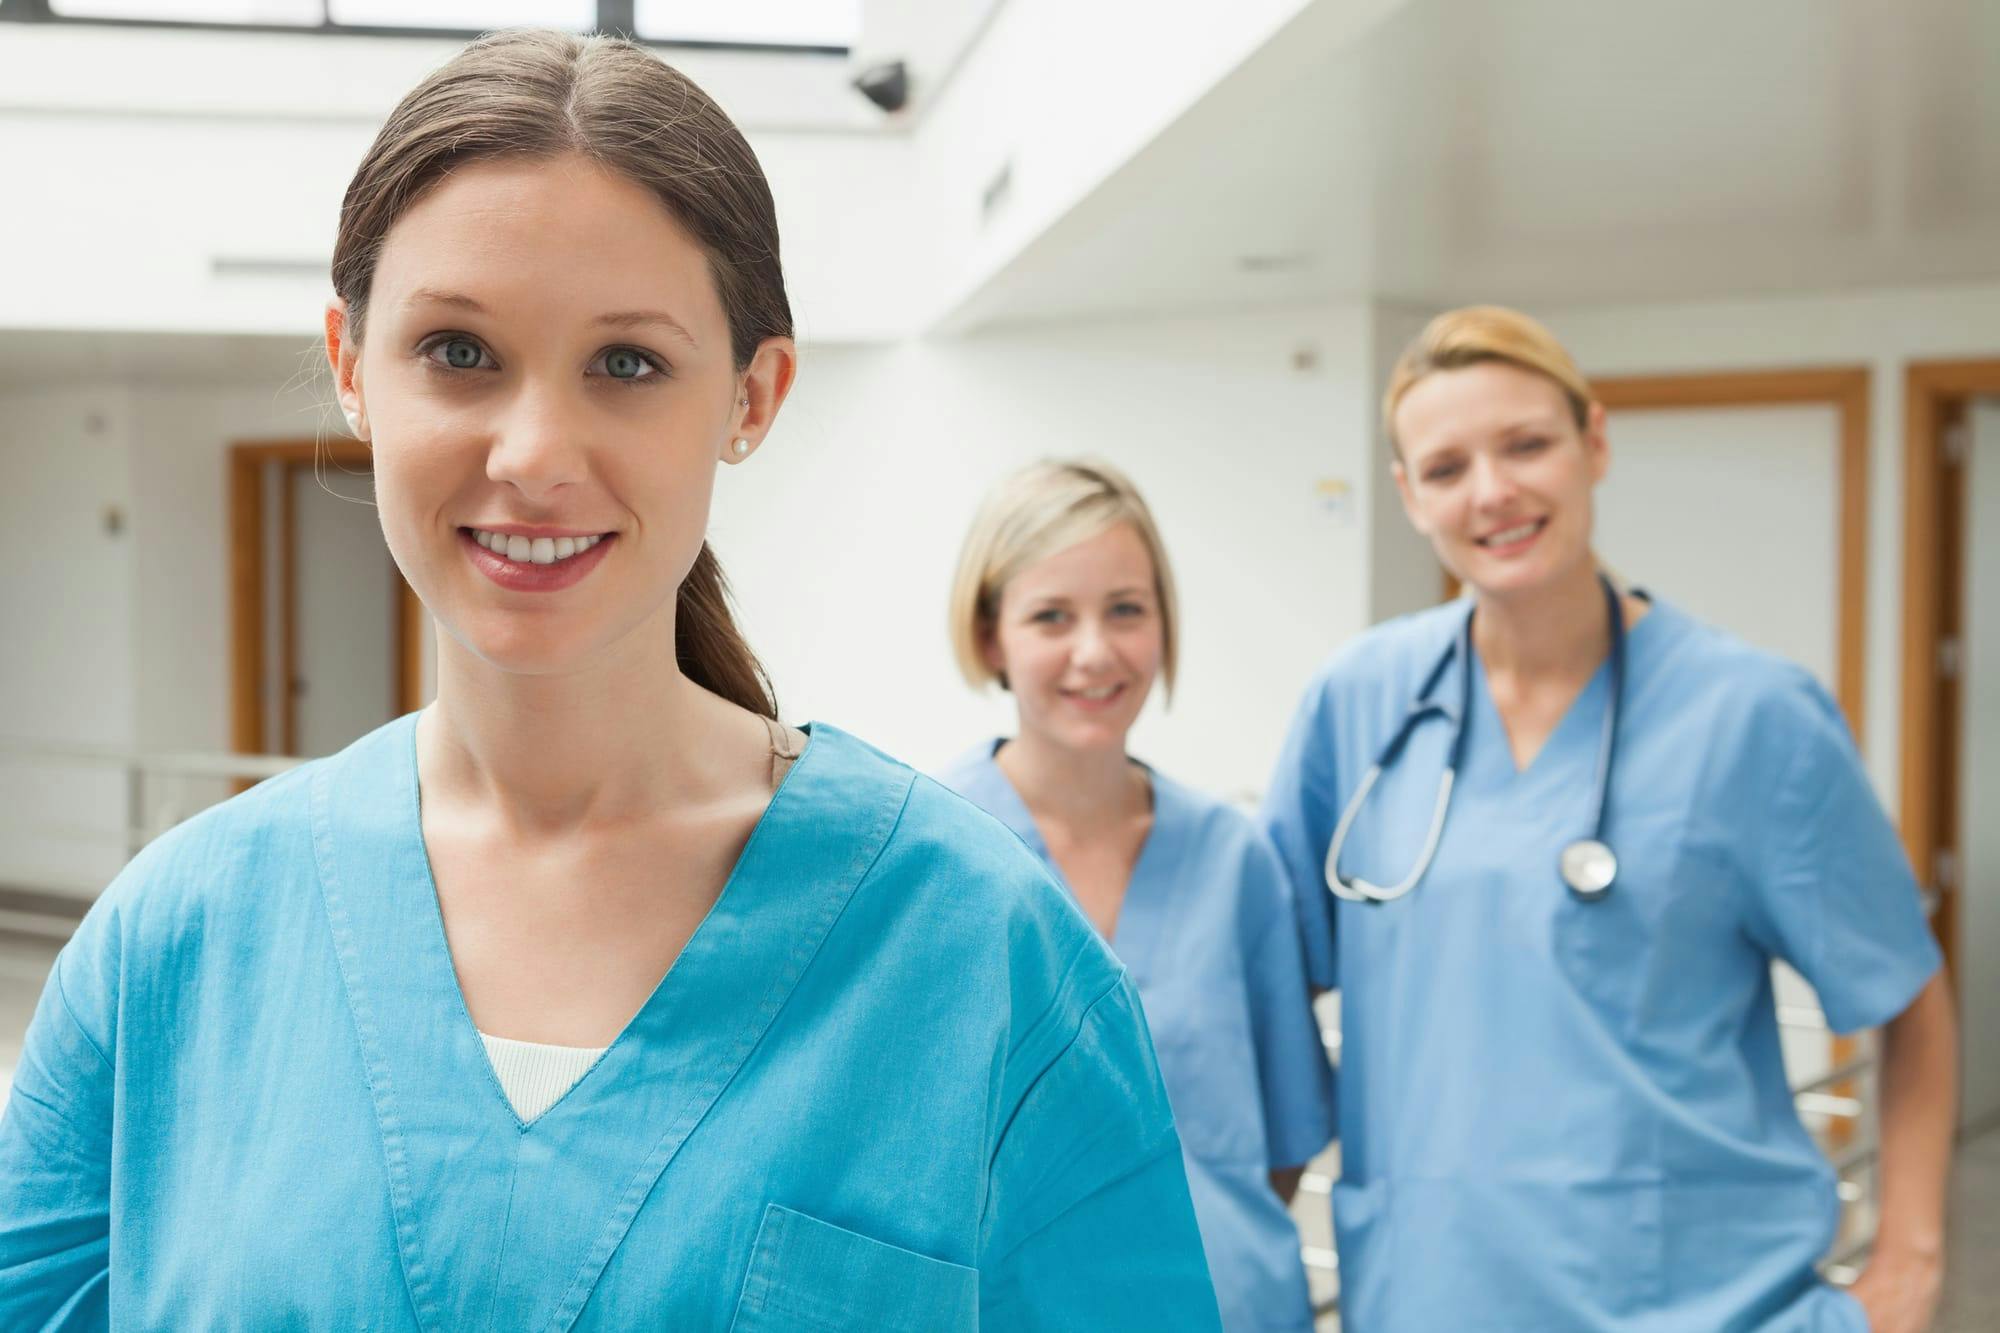 Clinical vs Administrative Medical Assistants: What are the Differences?